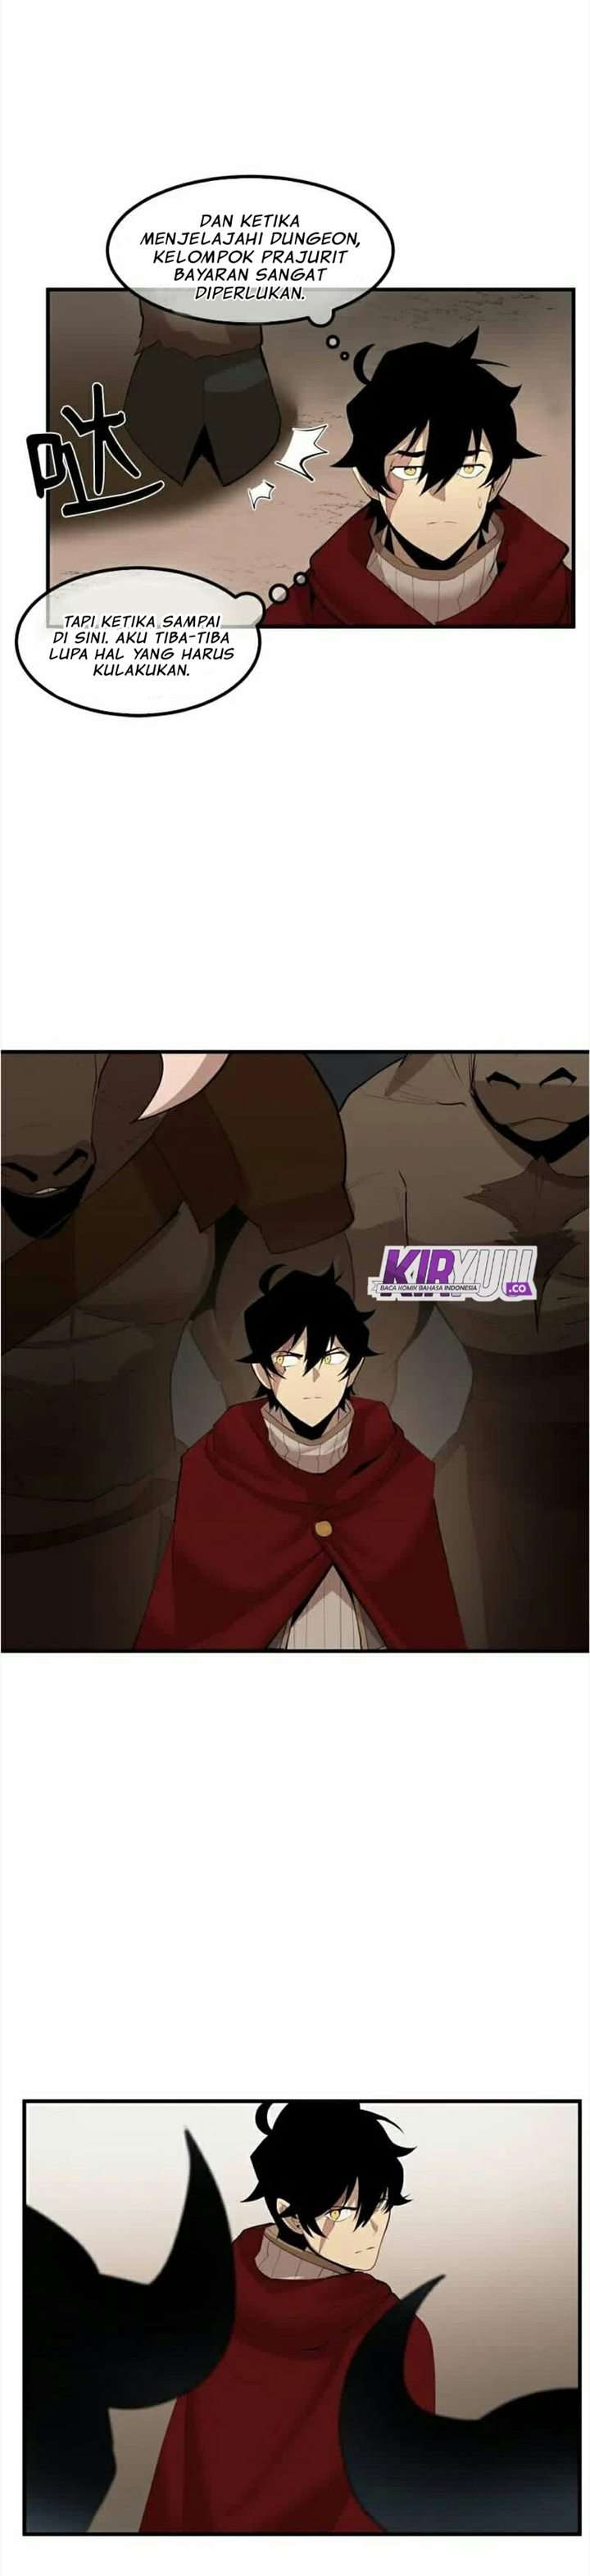 The Dungeon Master Chapter 65